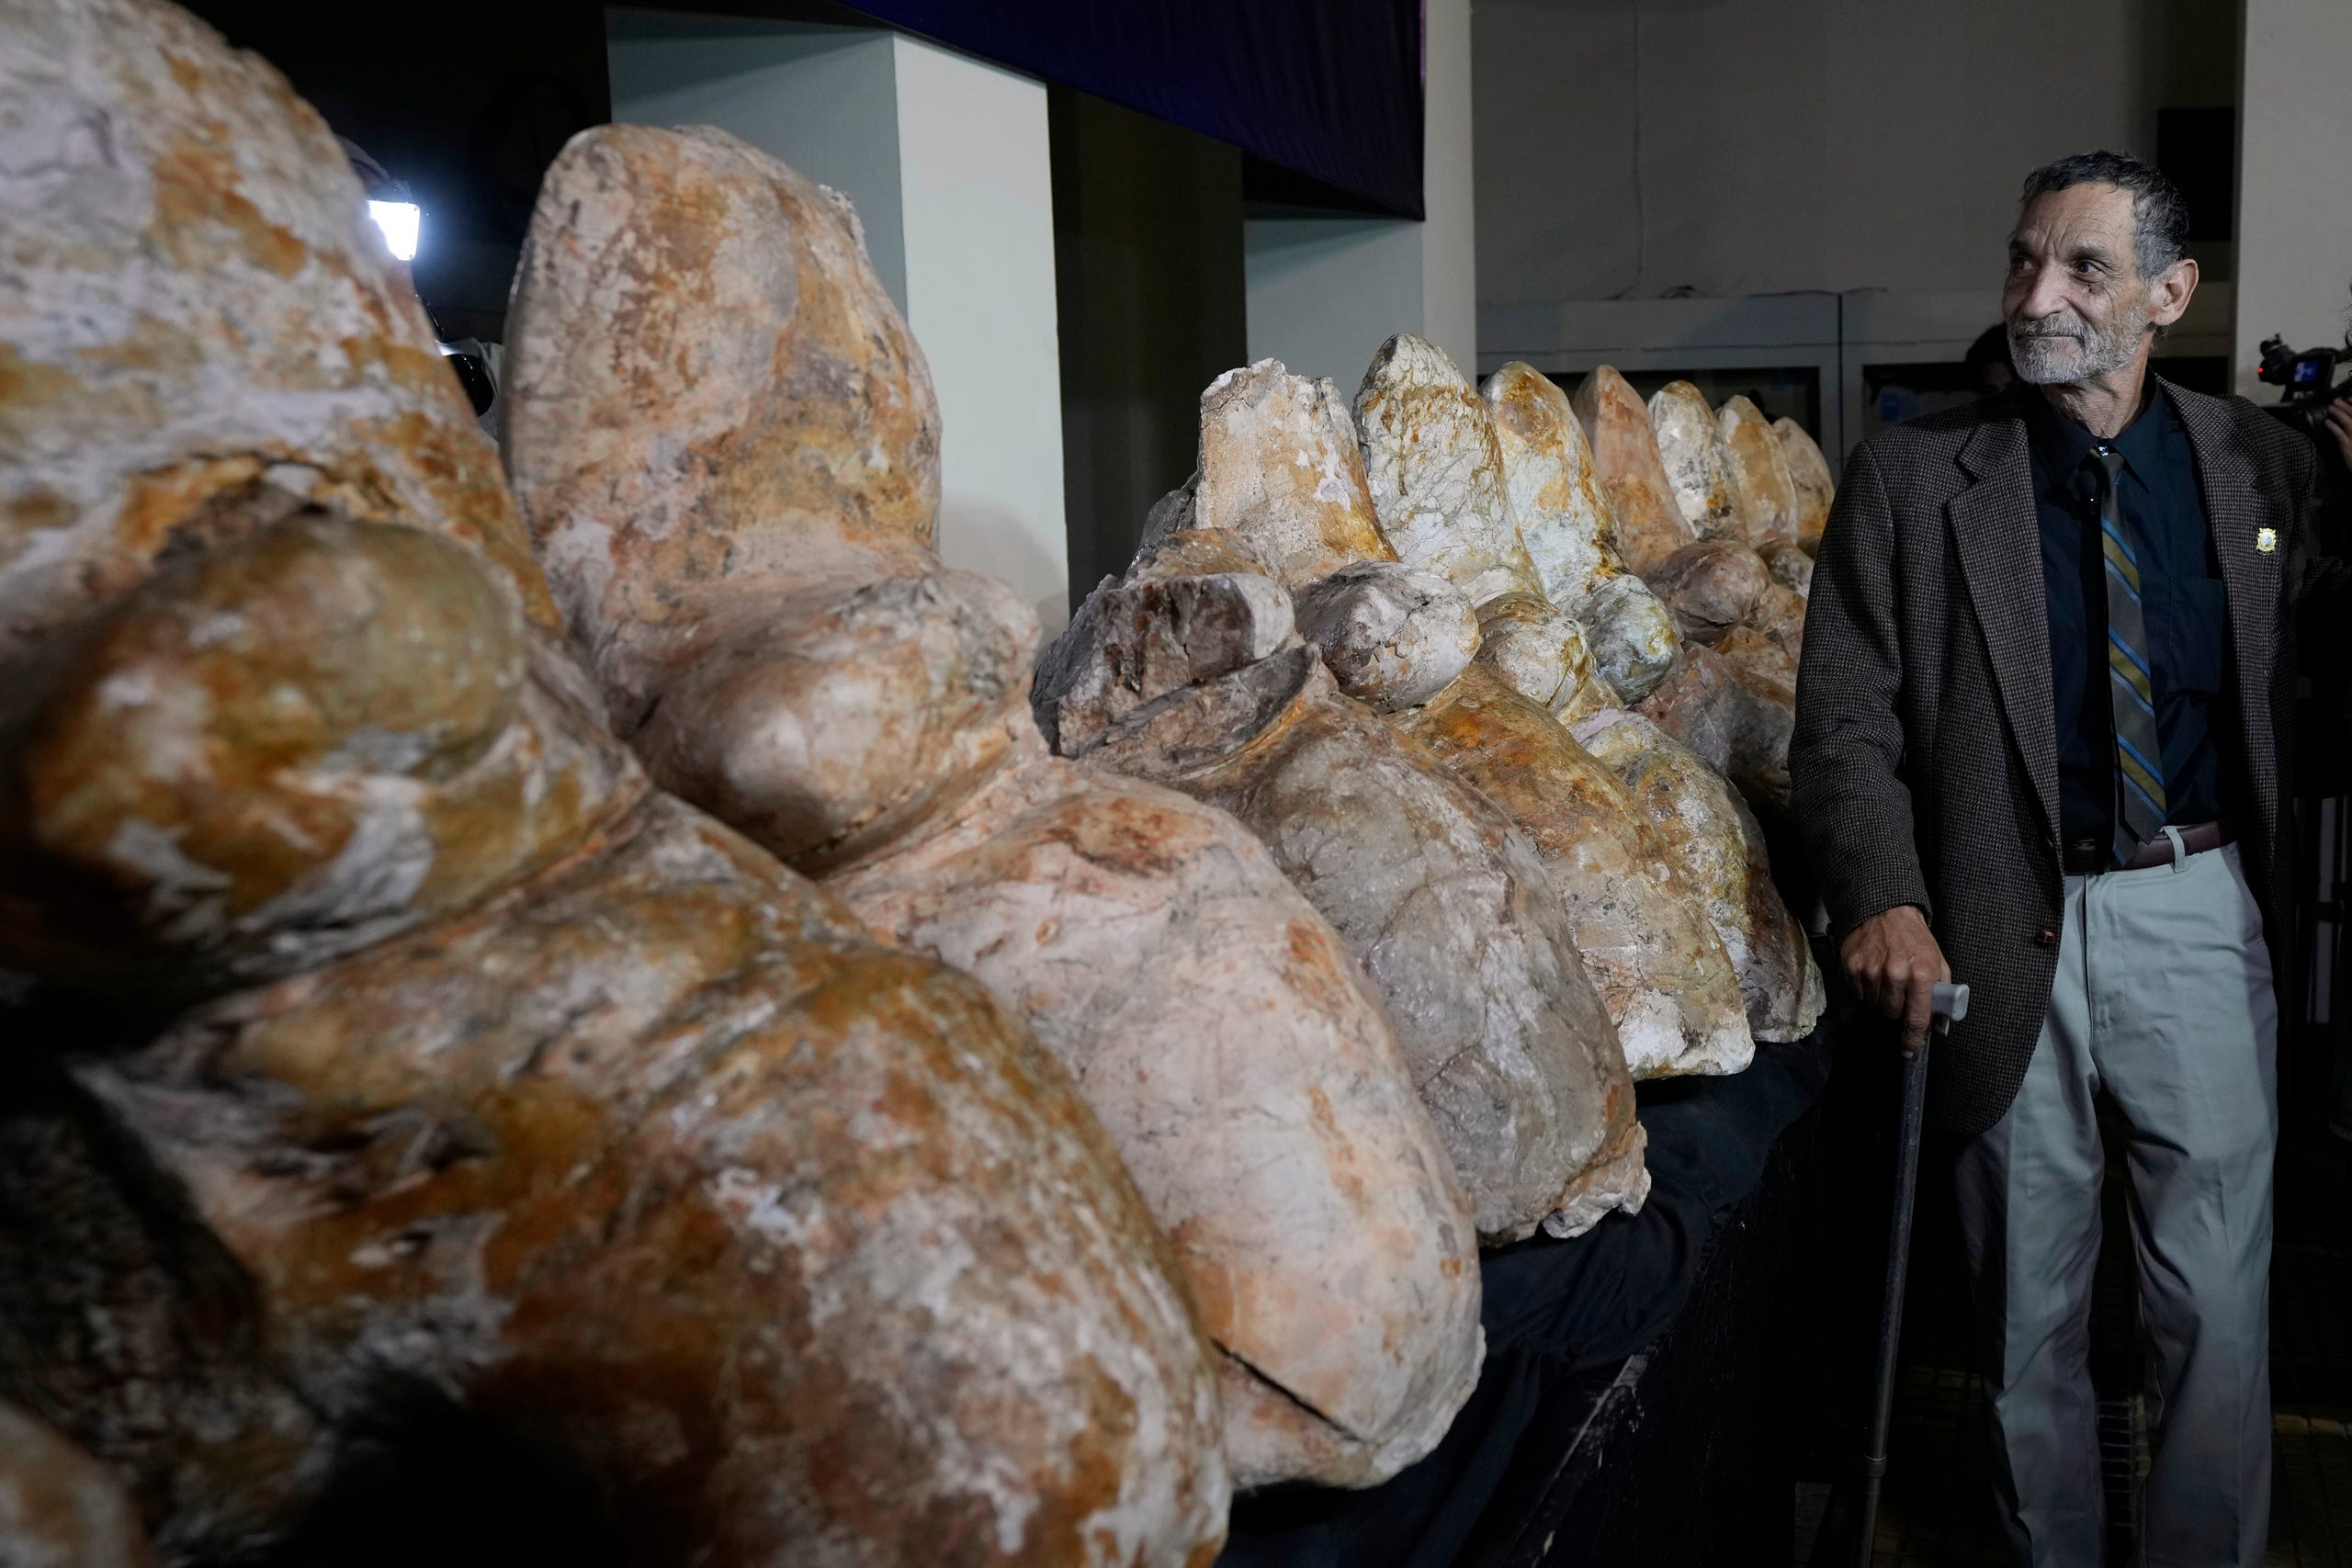 Paleontologist Mario Urbina poses for a photo next to the vertebrae of a newly found species named Perucetus colossus, or “the colossal whale from Peru”, during a presentation in Lima, Peru, Wednesday, Aug. 2, 2023.